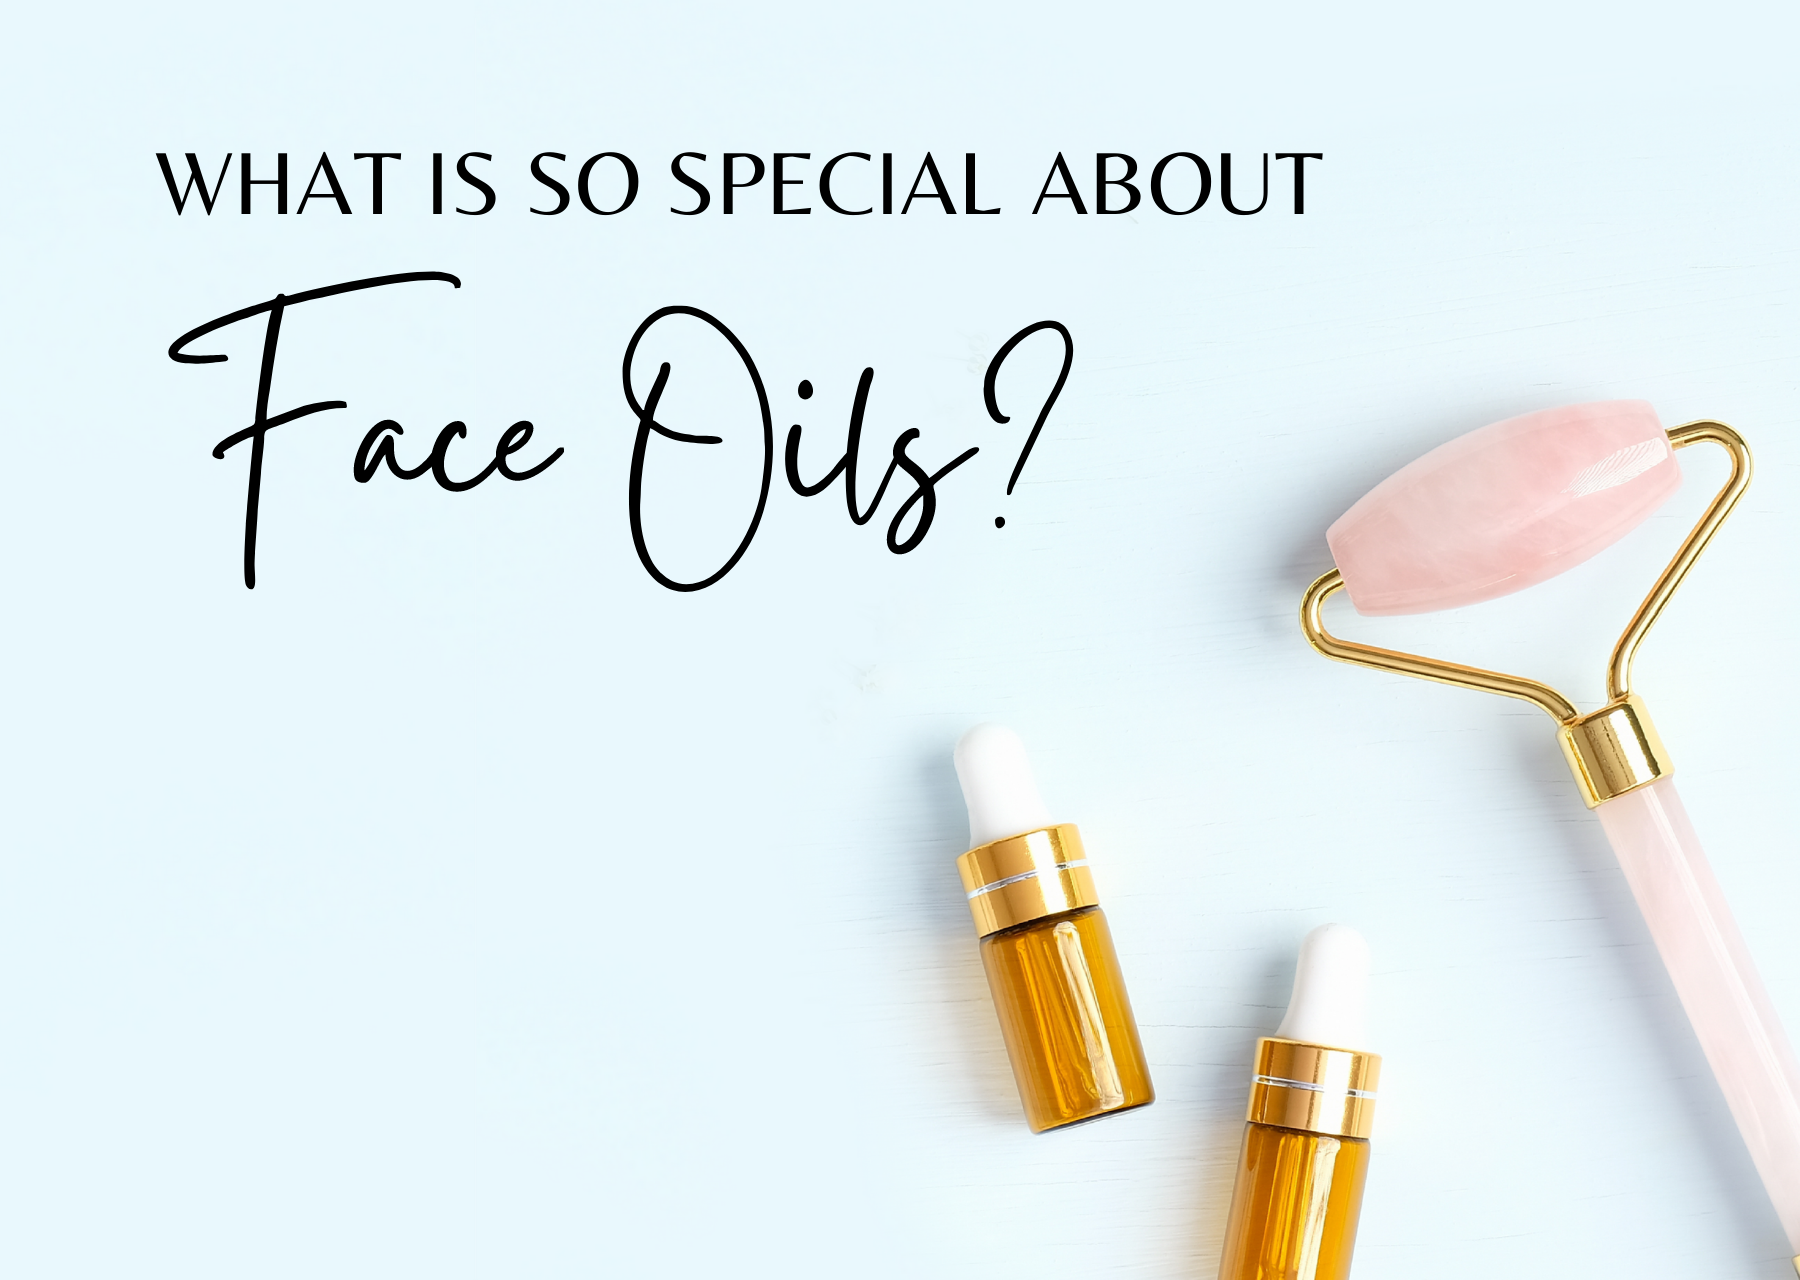 What is so special about face oils